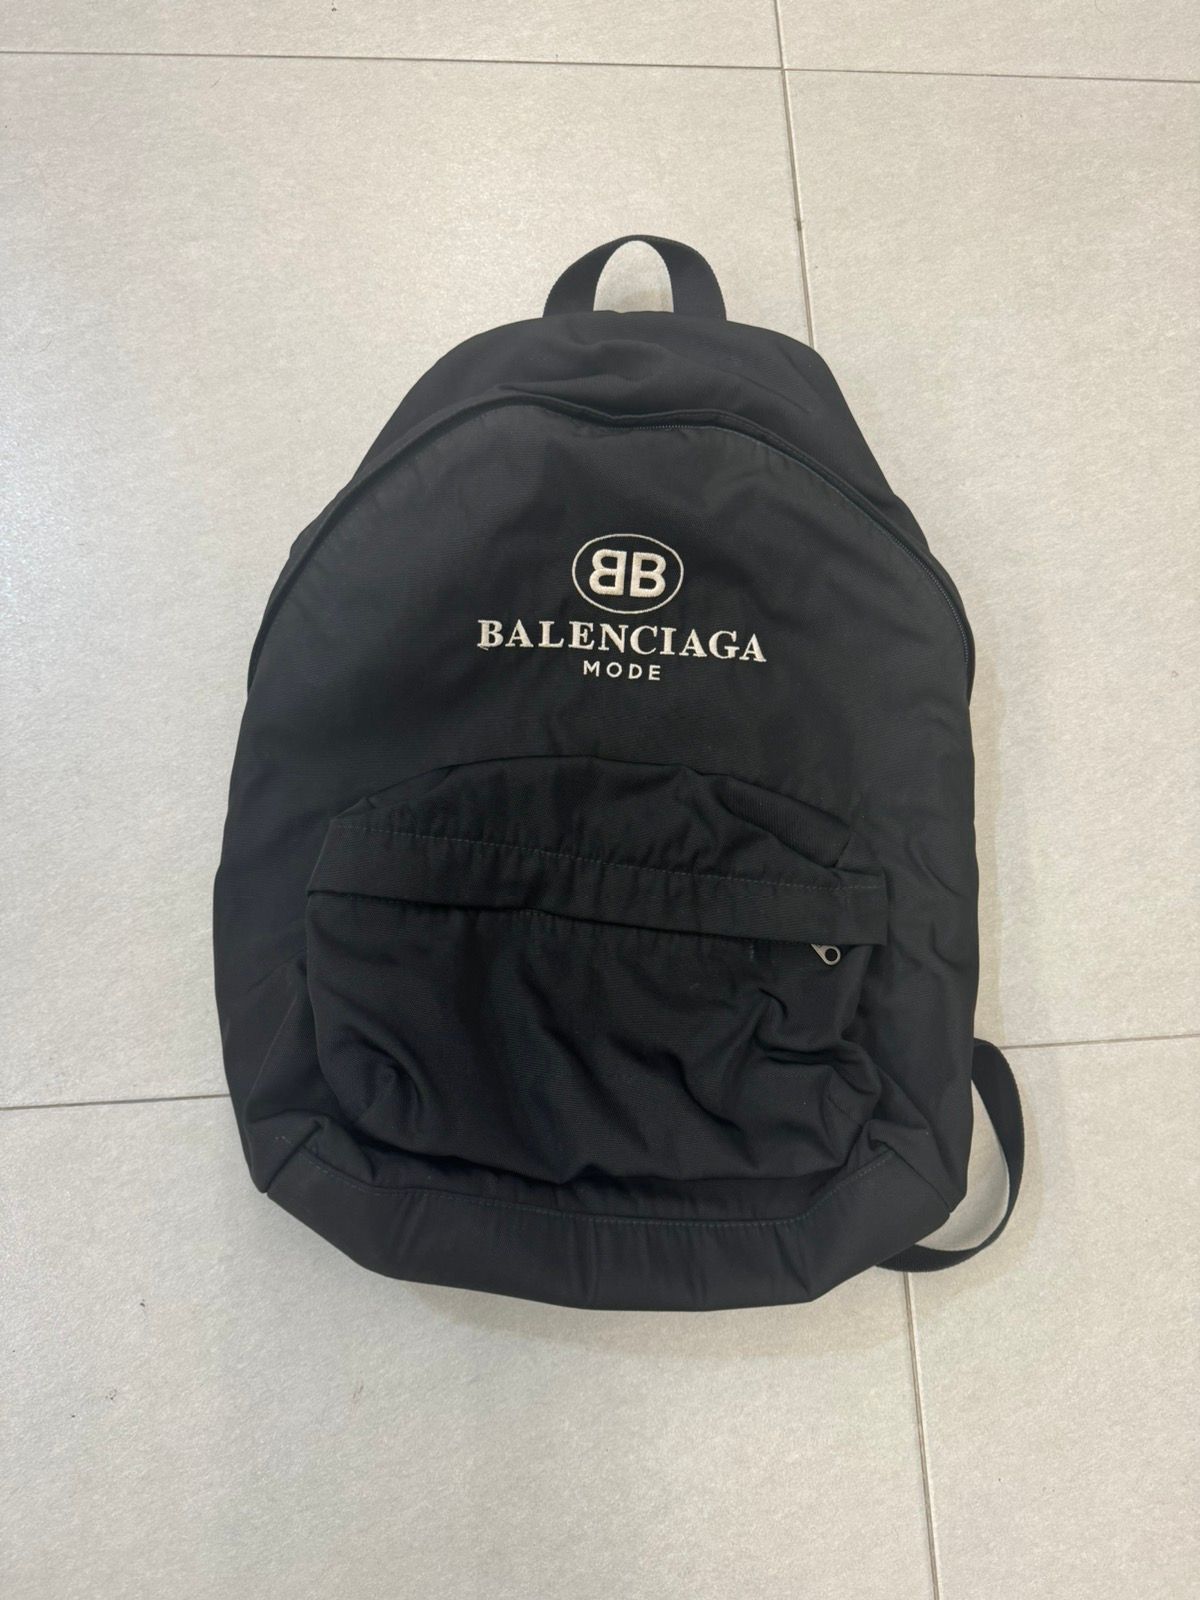 Pre-owned Balenciaga Mode Backpack In Black